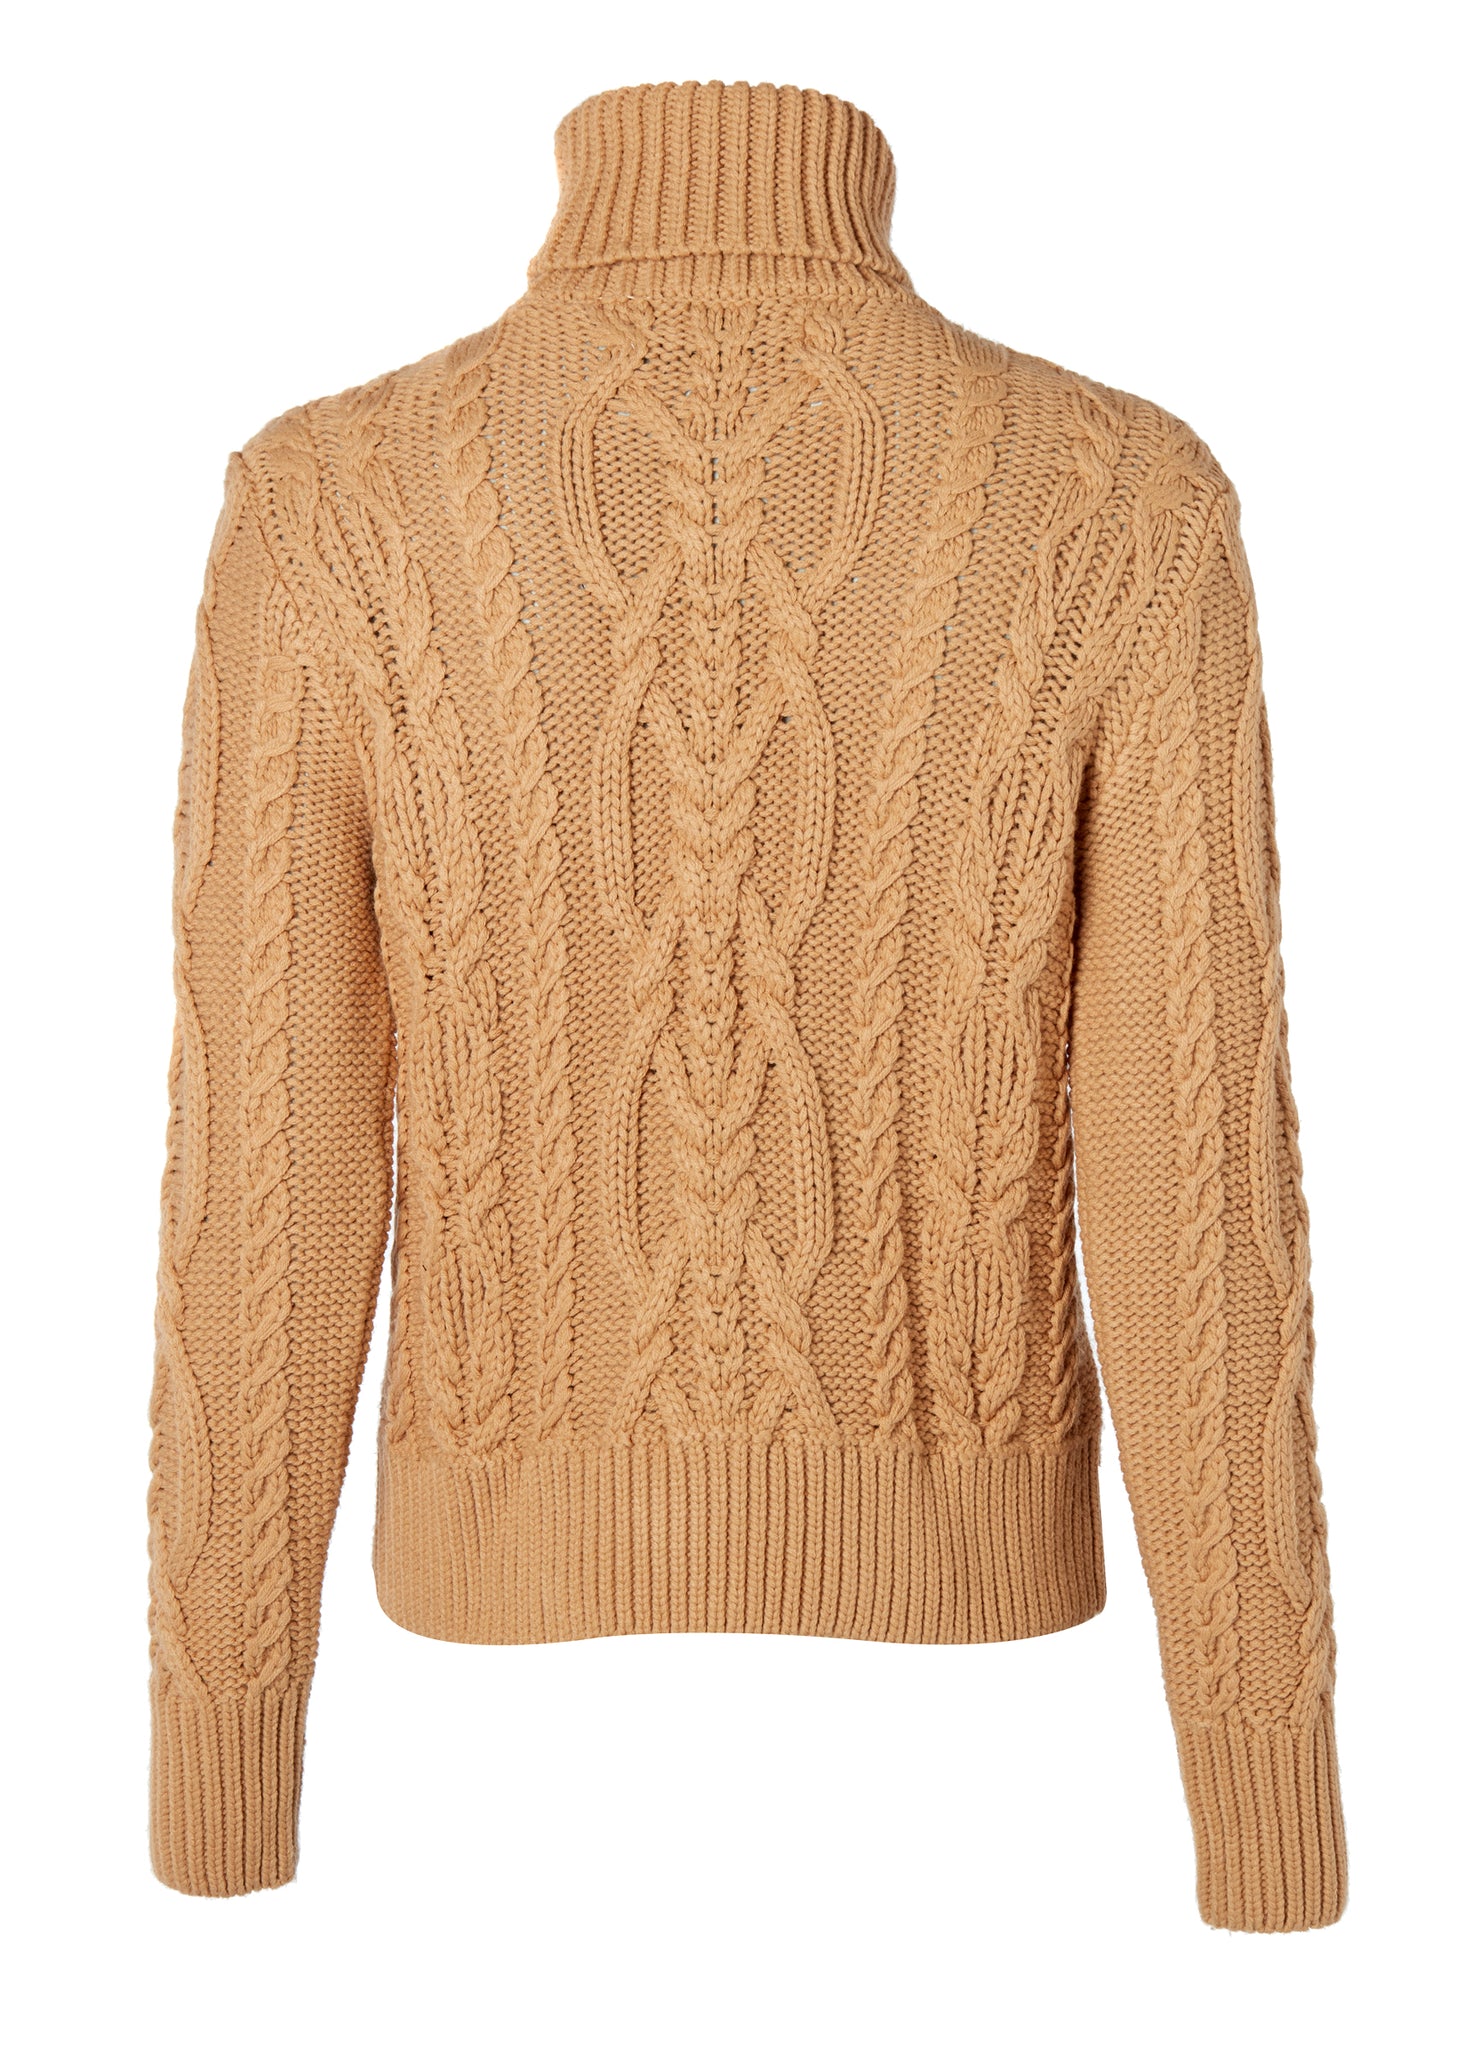 back of a chunky cable knit roll neck jumper in camel with dropped shoulders and thick ribbed cable trims and gold buttons on cuffs and collar